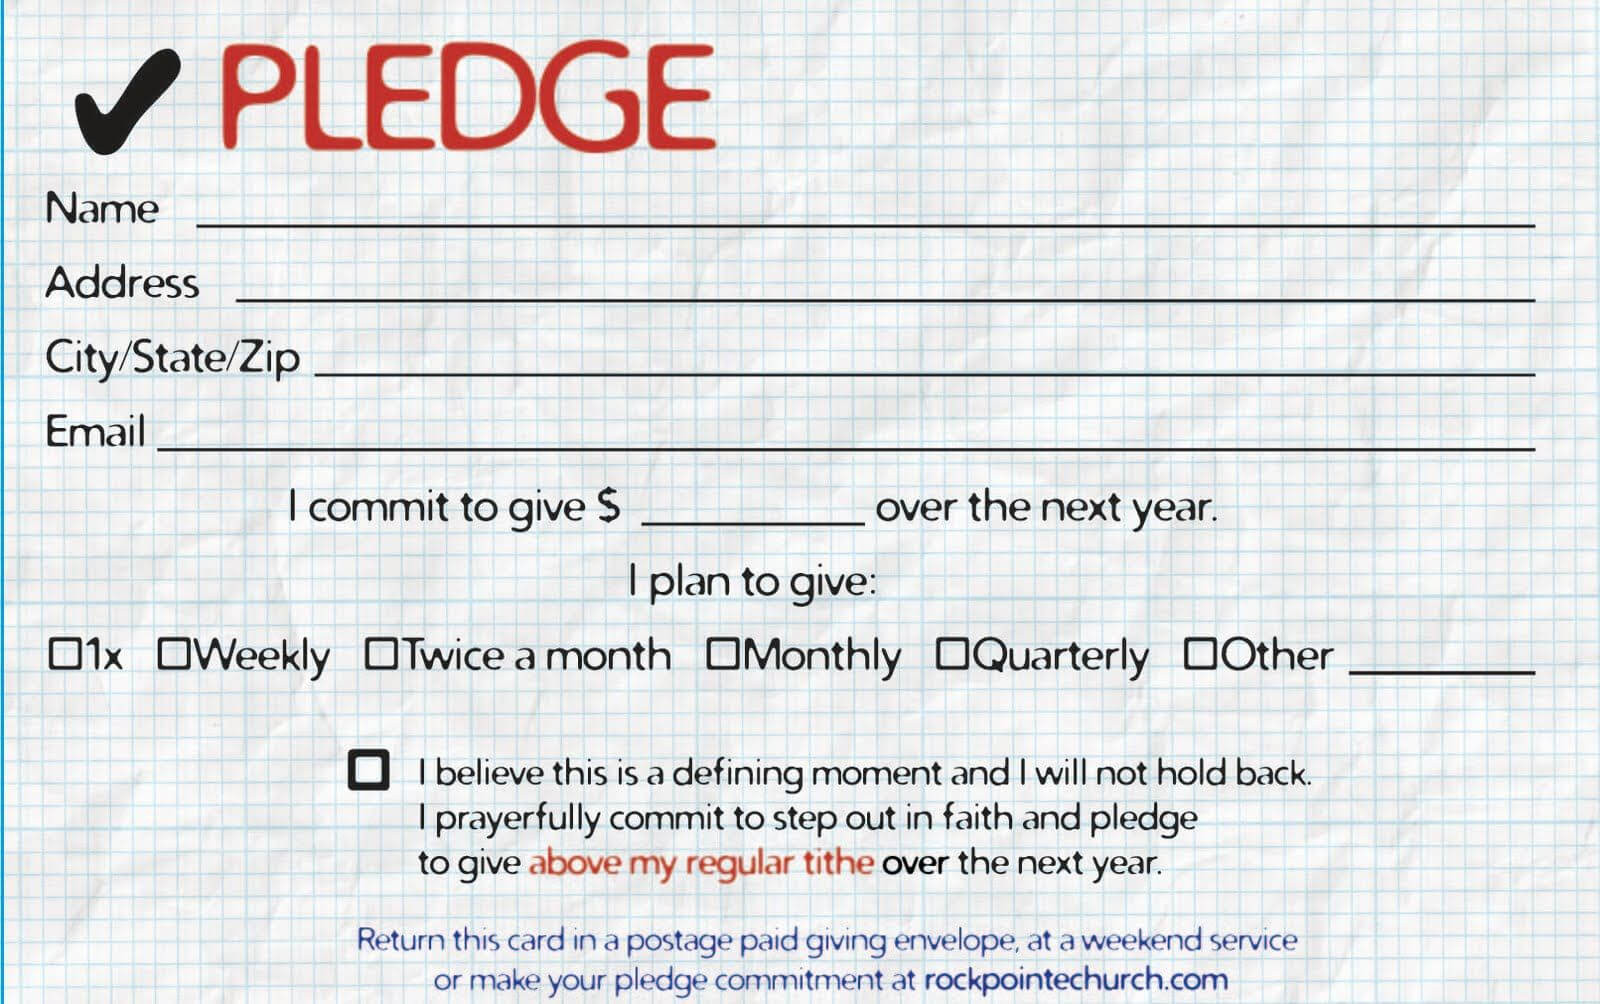 Pledge Cards For Churches | Pledge Card Templates | My Stuff Within Free Pledge Card Template